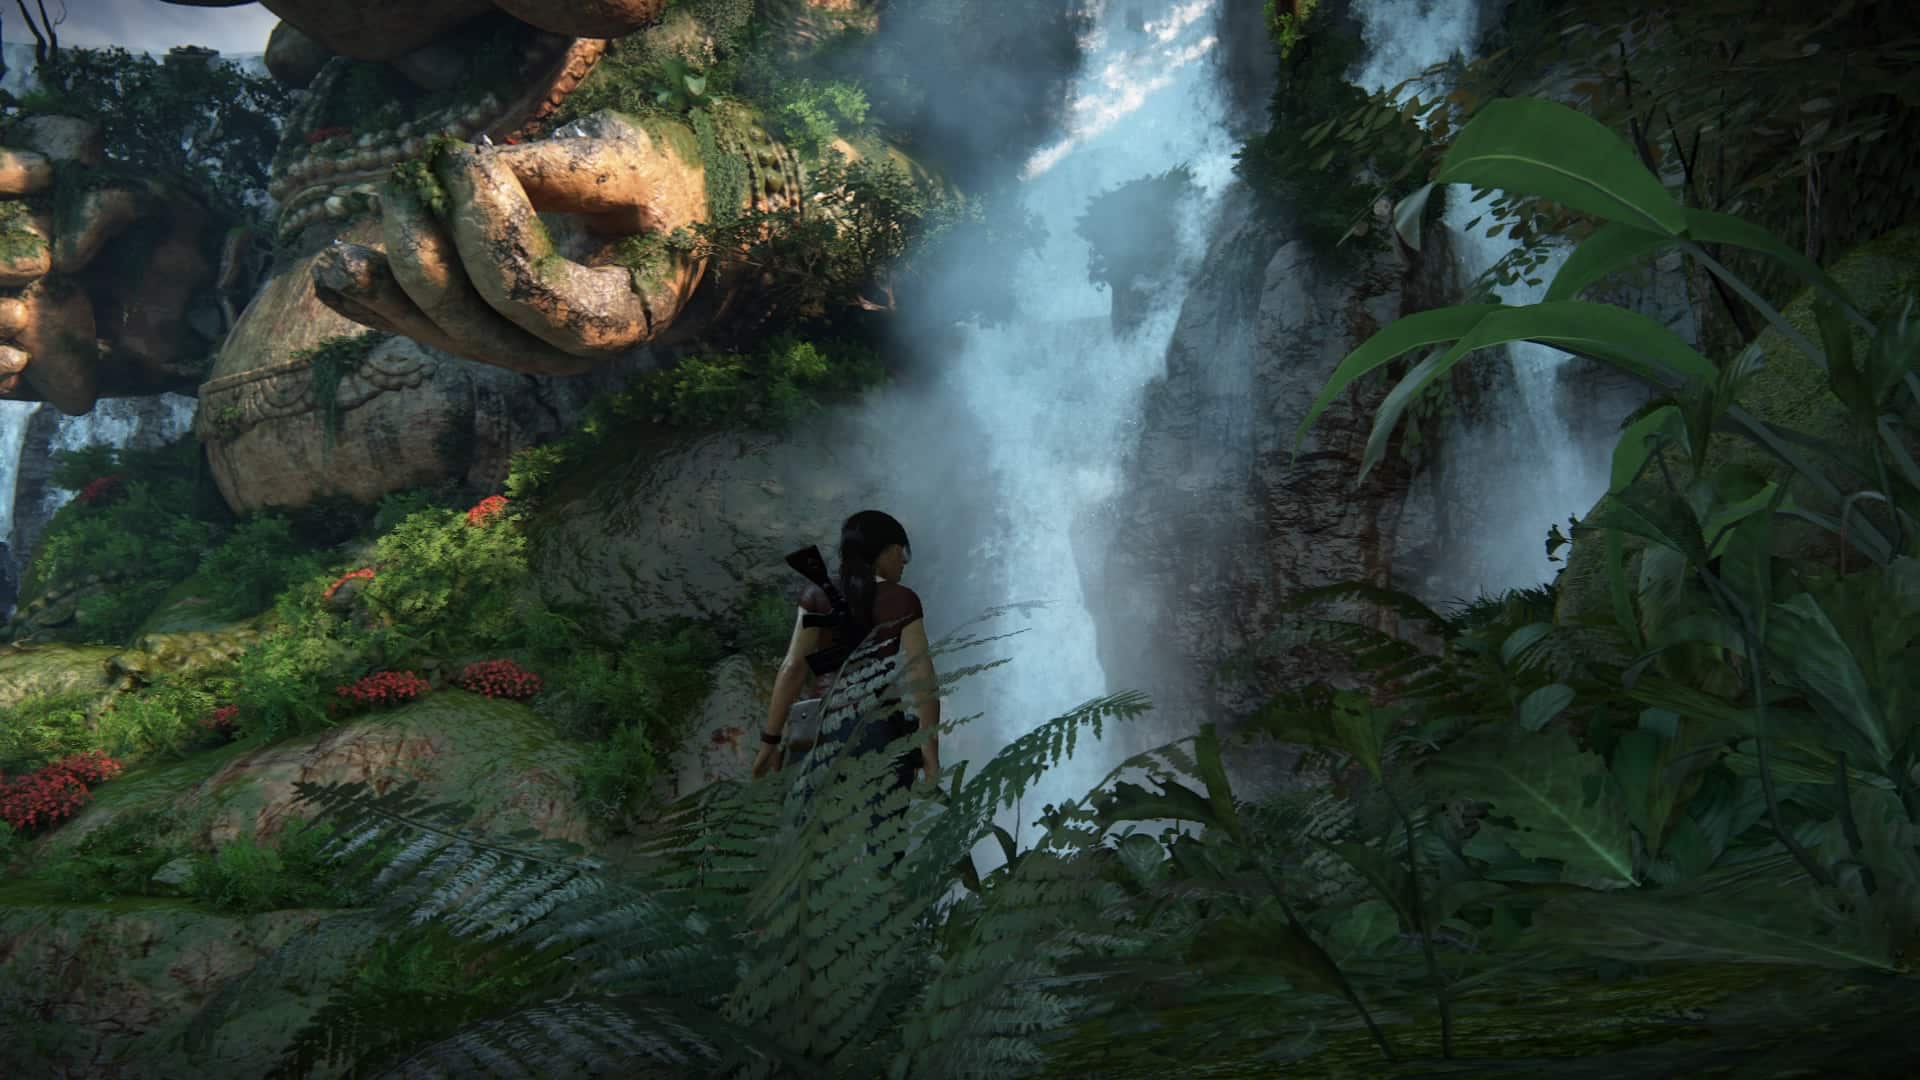 Nature is very alive in Uncharted The Lost Legacy